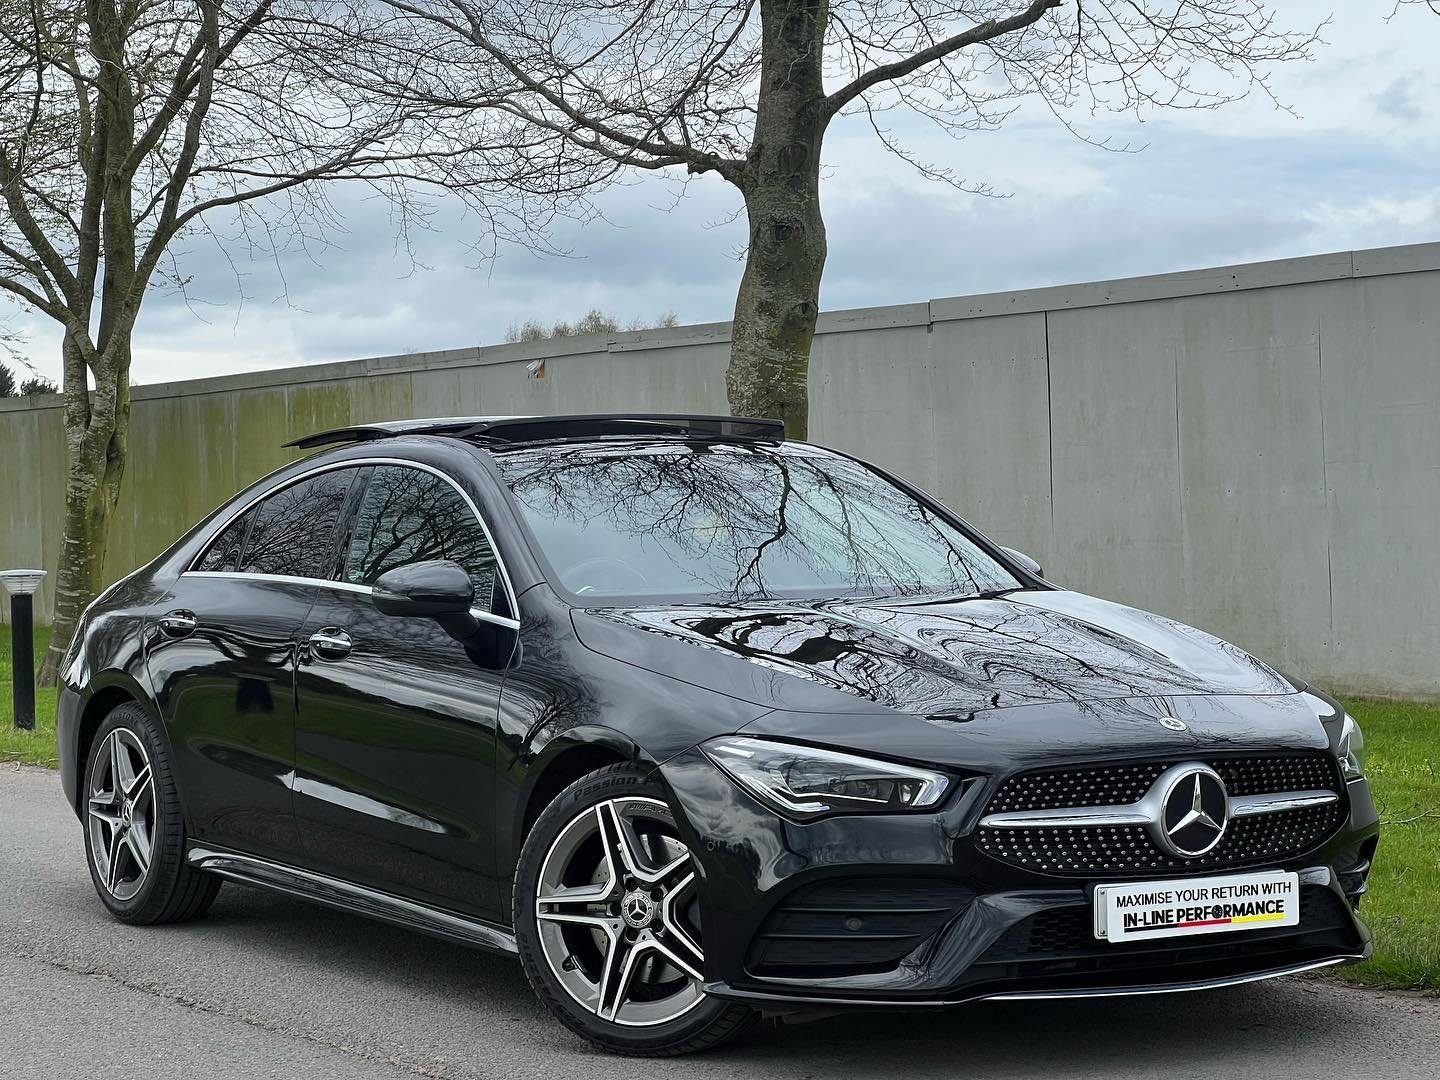 Here At IN-LINE PERFORMANCE We Take Pride And Joy Into Supplying You With The Best Of German Engineering . We Are Proud To Present To You This 2020 Mercedes Benz CLA Premium Plus Finished In A Desirable Black Sapphire With  Black Leather Interior.
We